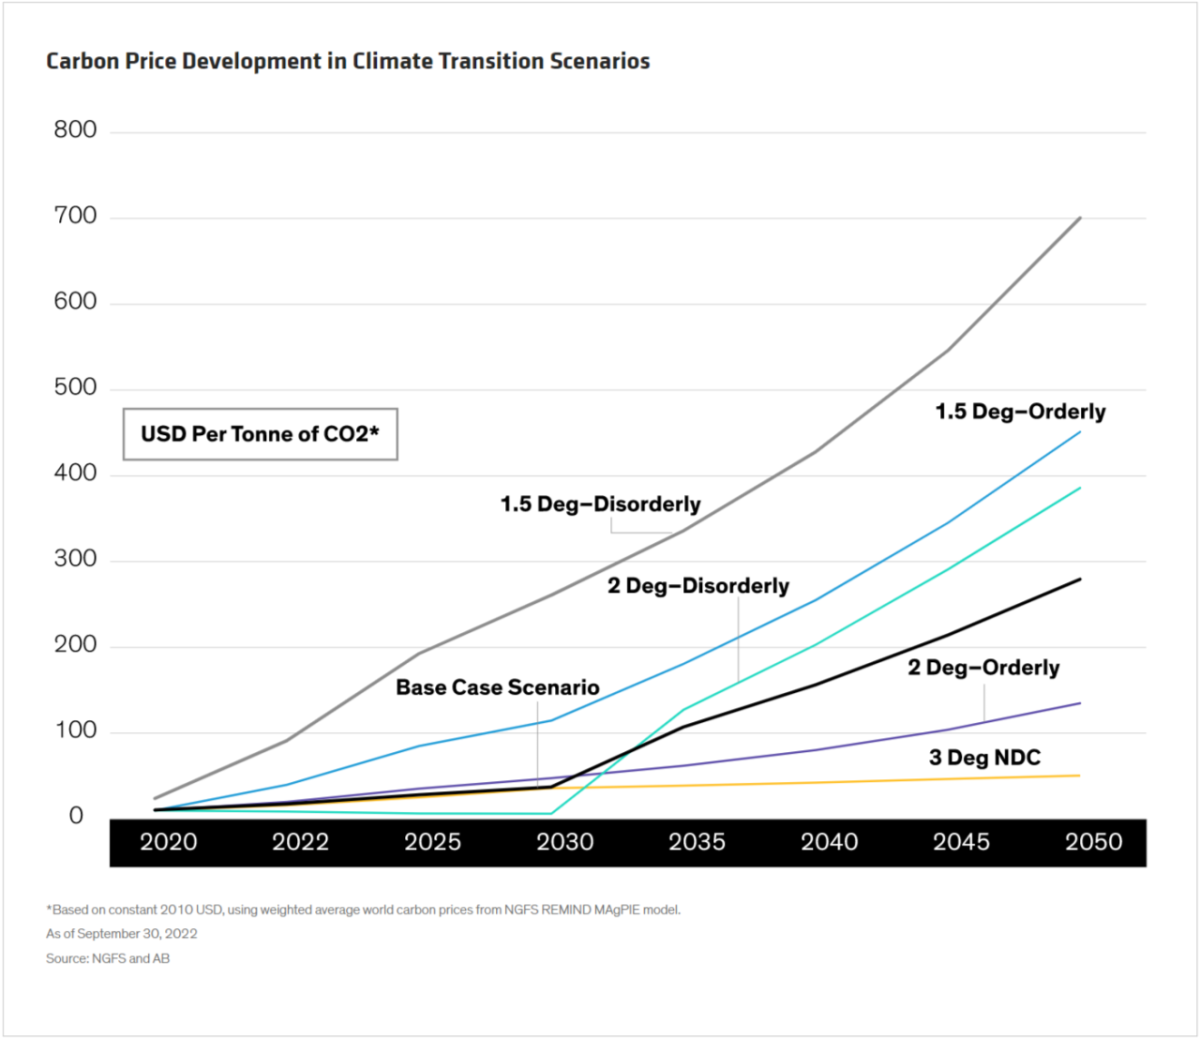 Info graph chart "Carbon Price Development in Climate Transition Scenarios" with data showing upward trends from 2020 to 2060